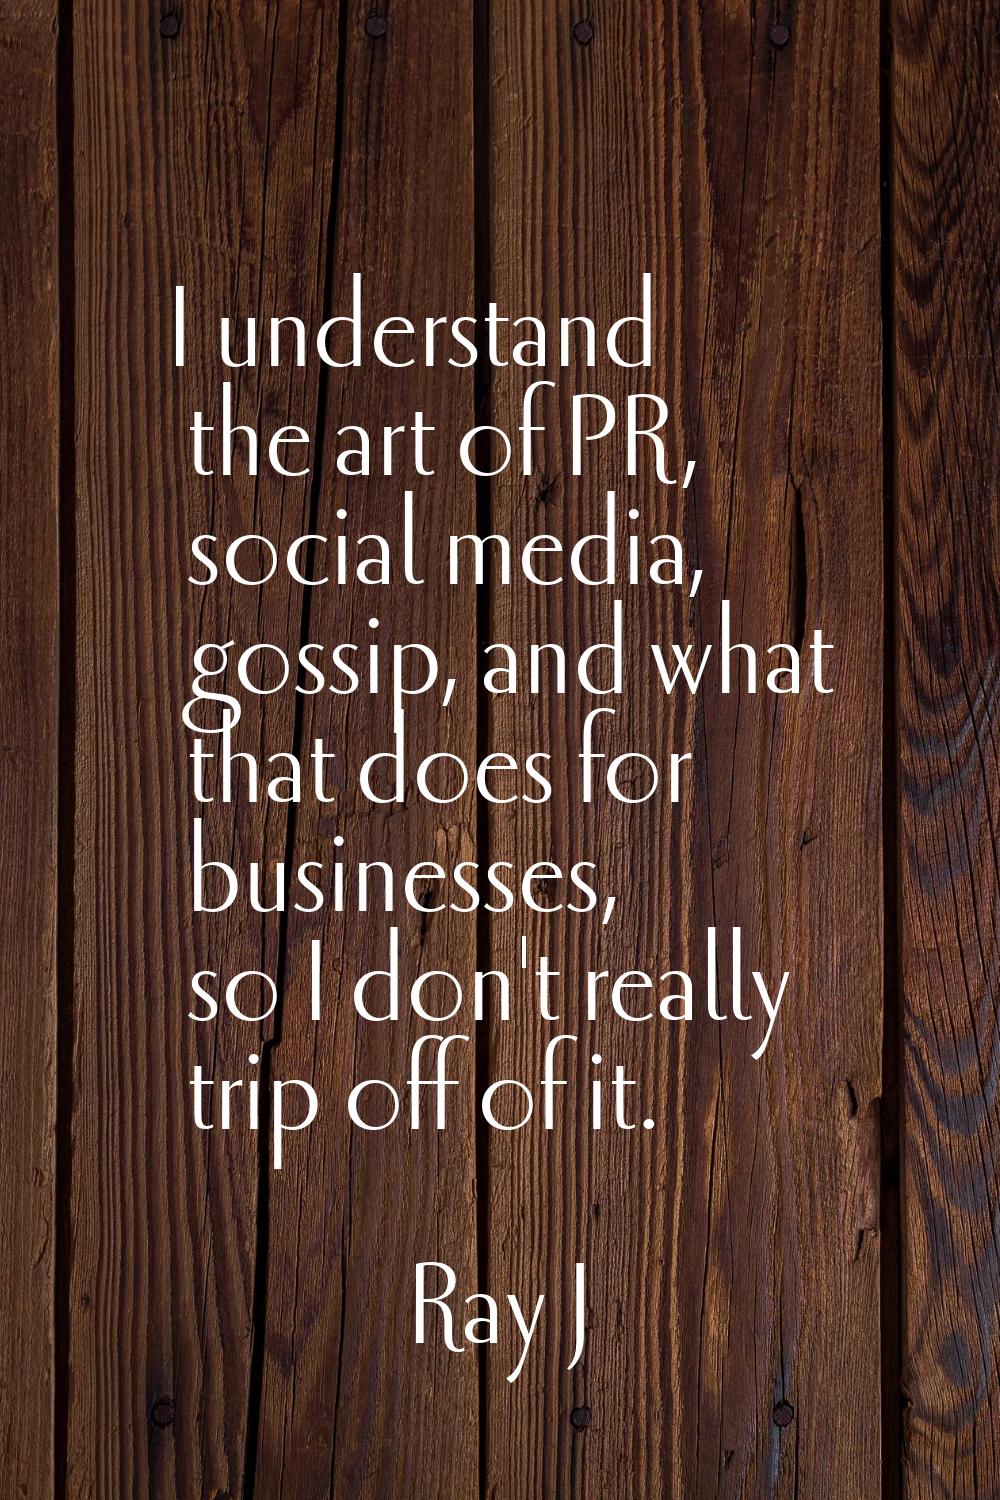 I understand the art of PR, social media, gossip, and what that does for businesses, so I don't rea